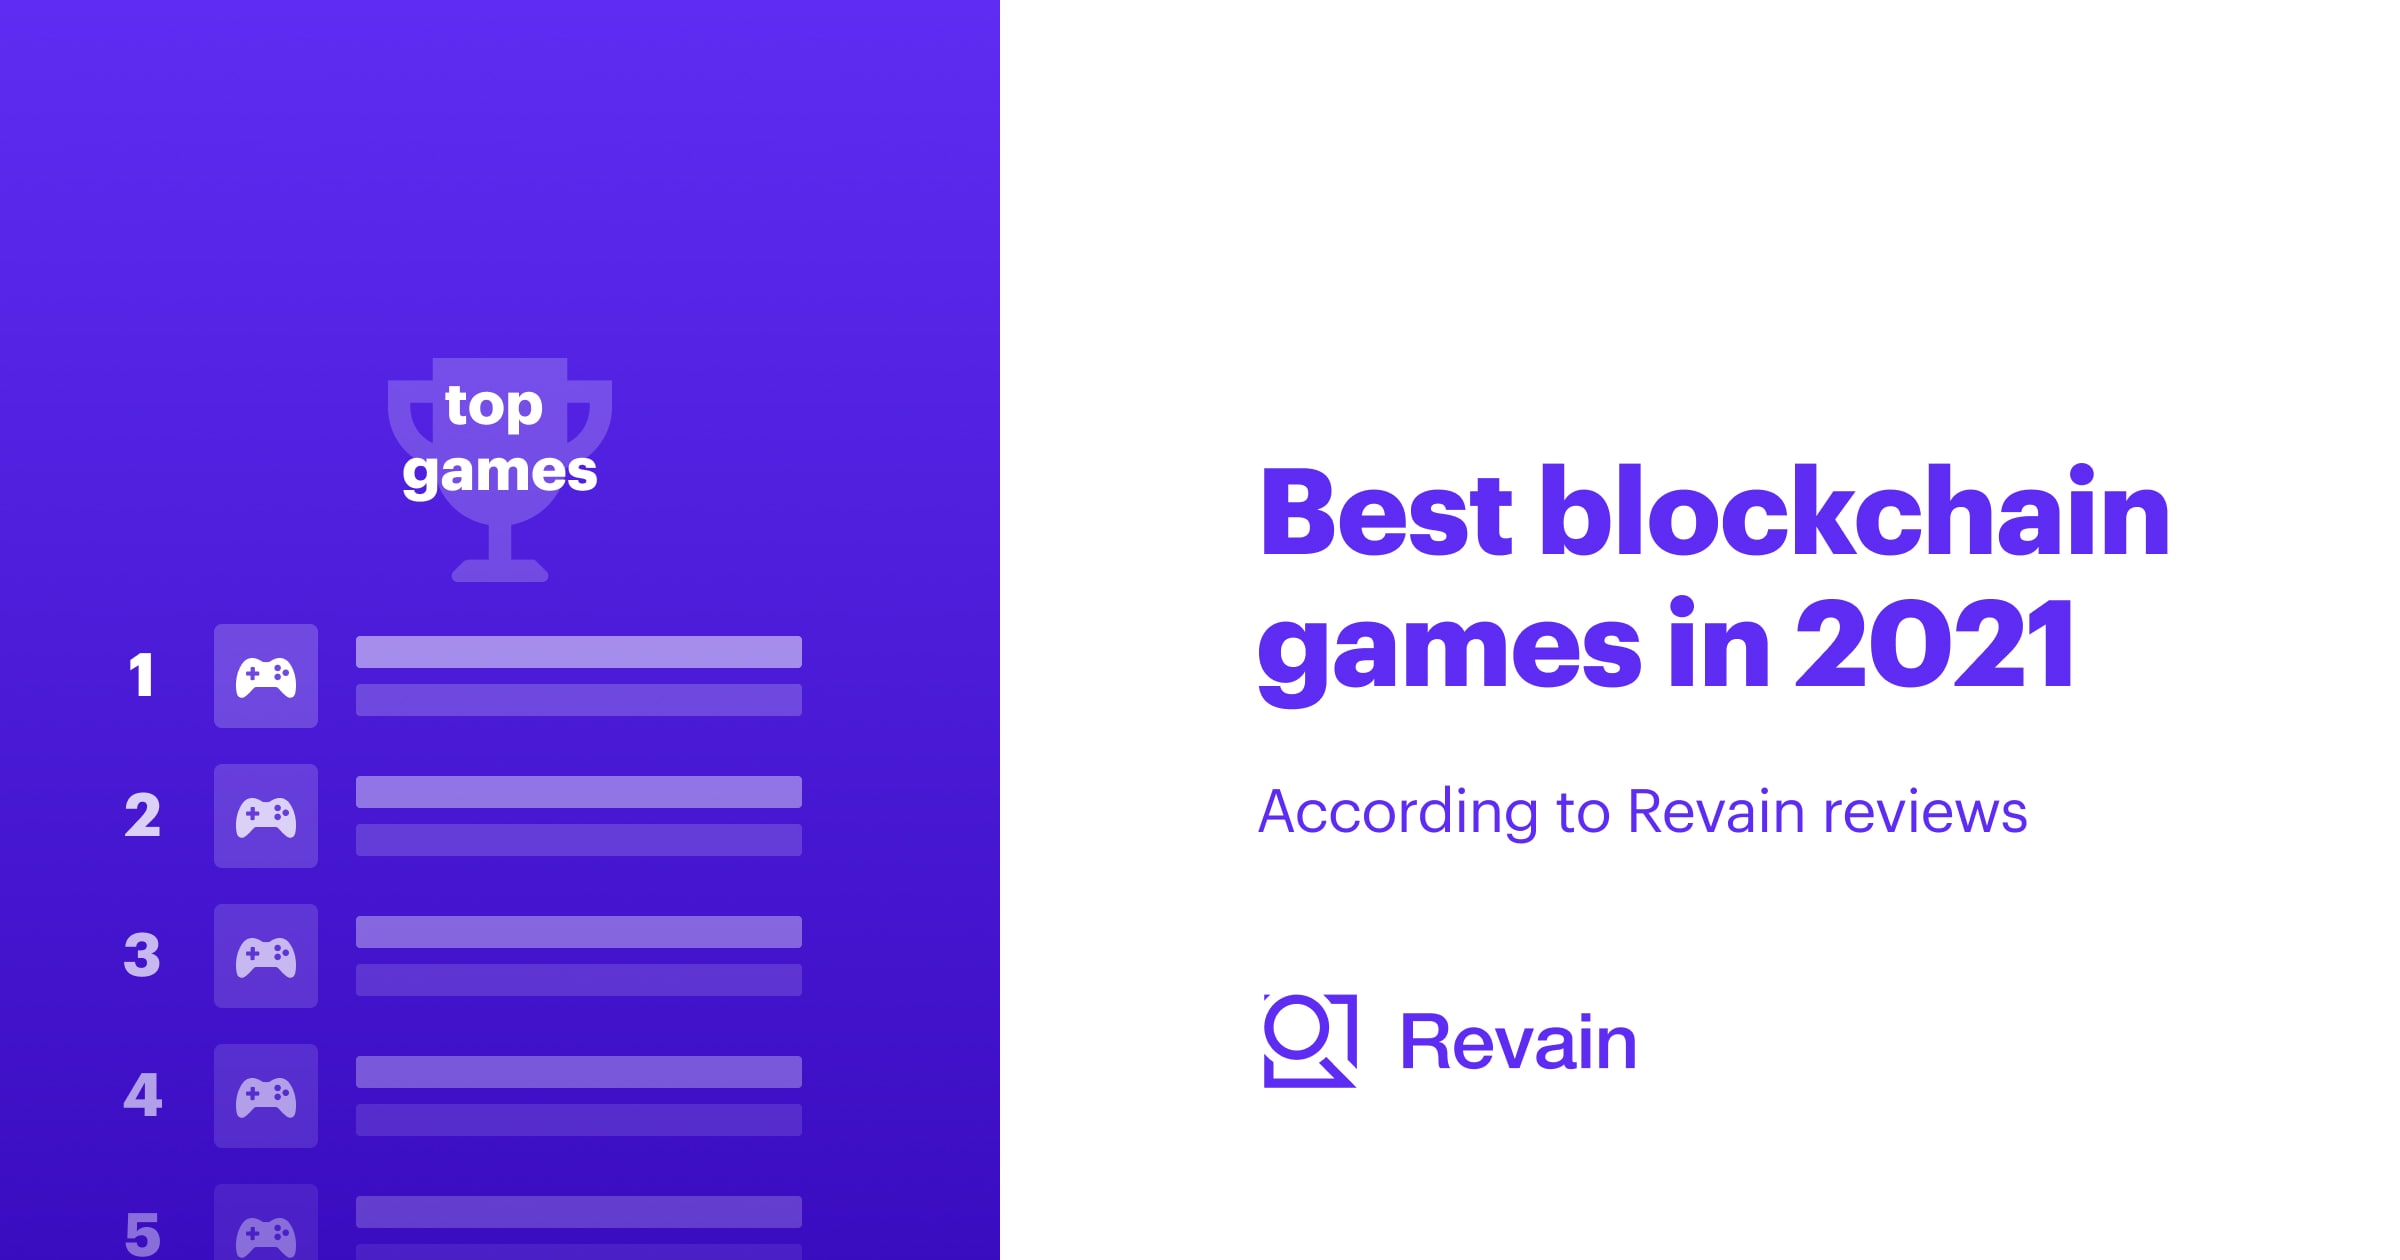 Article Best blockchain games in 2021, according to Revain reviews